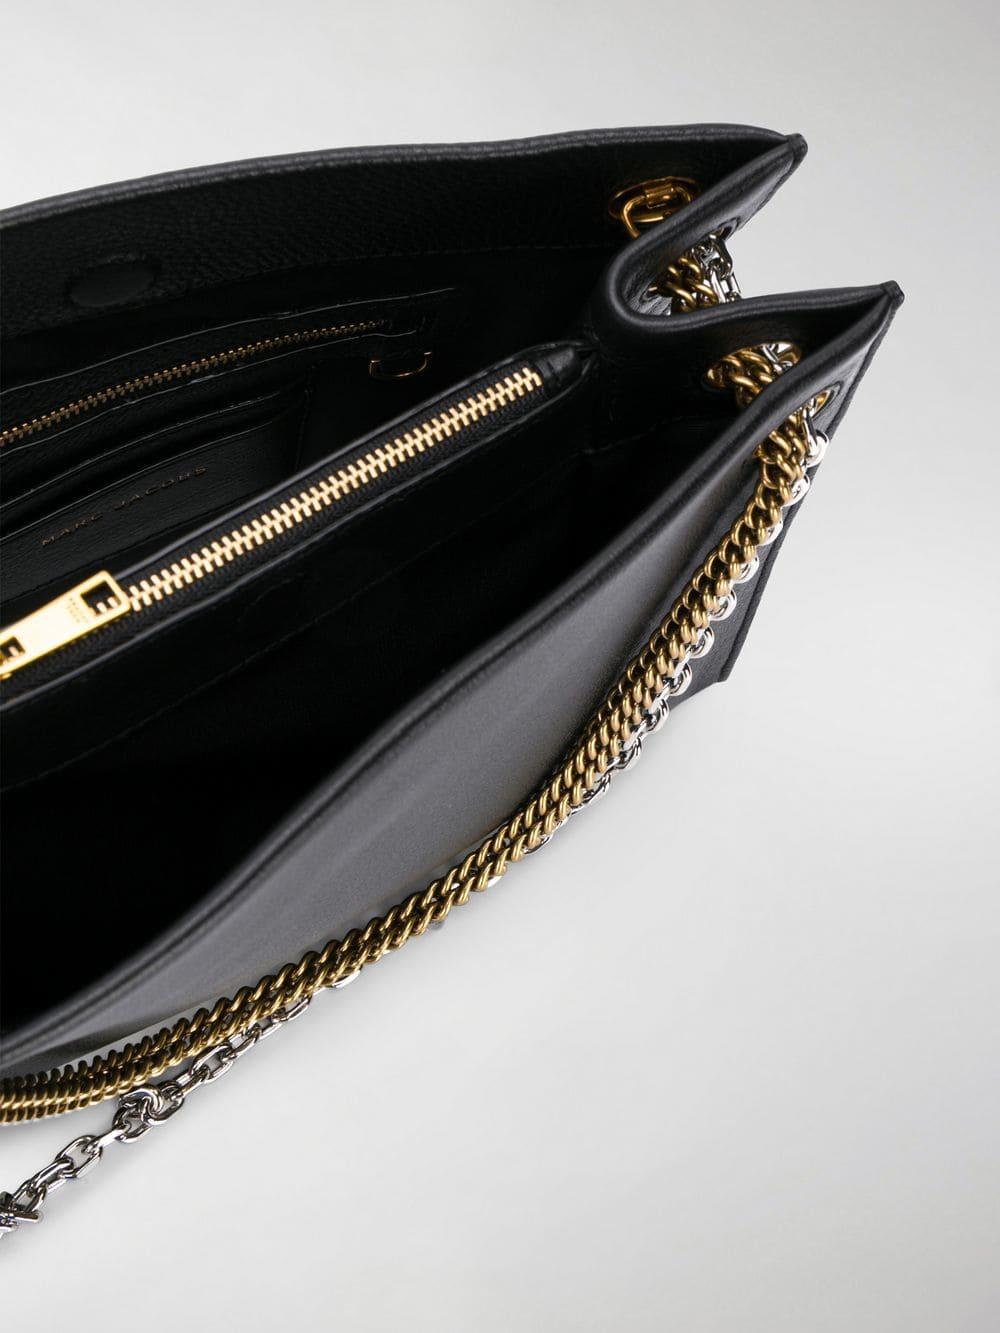 Marc Jacobs Double Chain Crossbody Bag in Black - Lyst